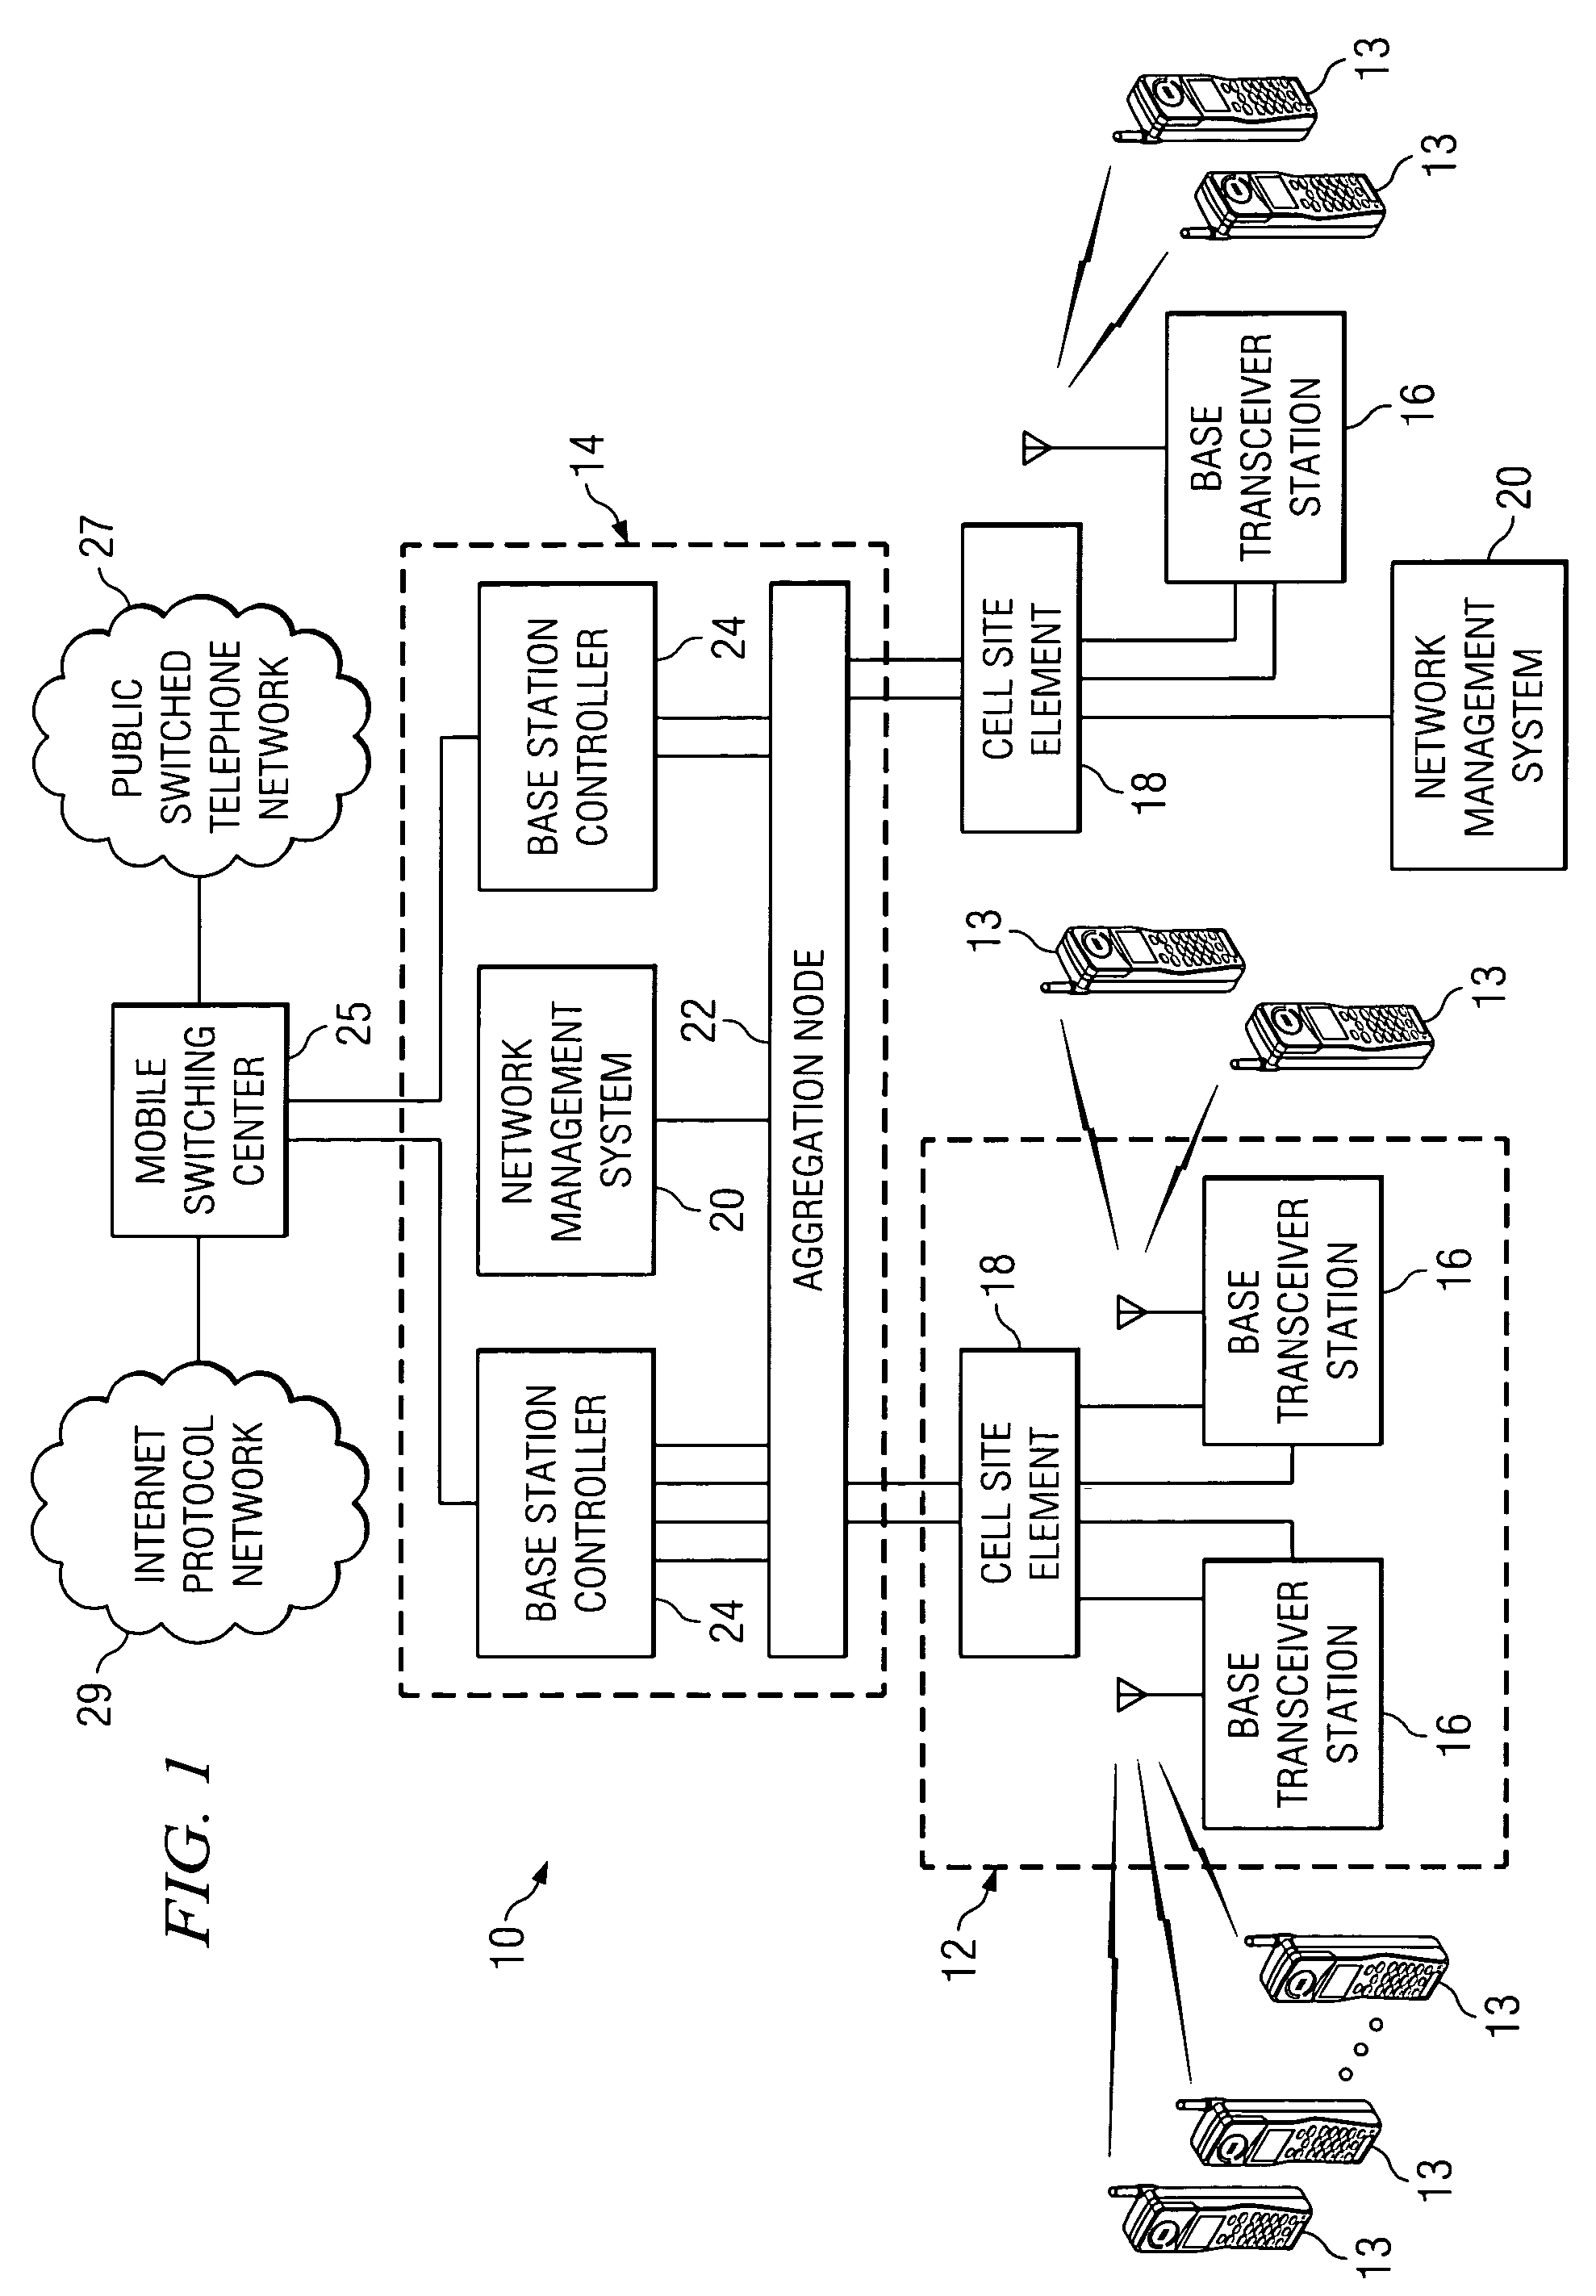 System and method for implementing dynamic suppression and recreation of suppressed data in a communications environment